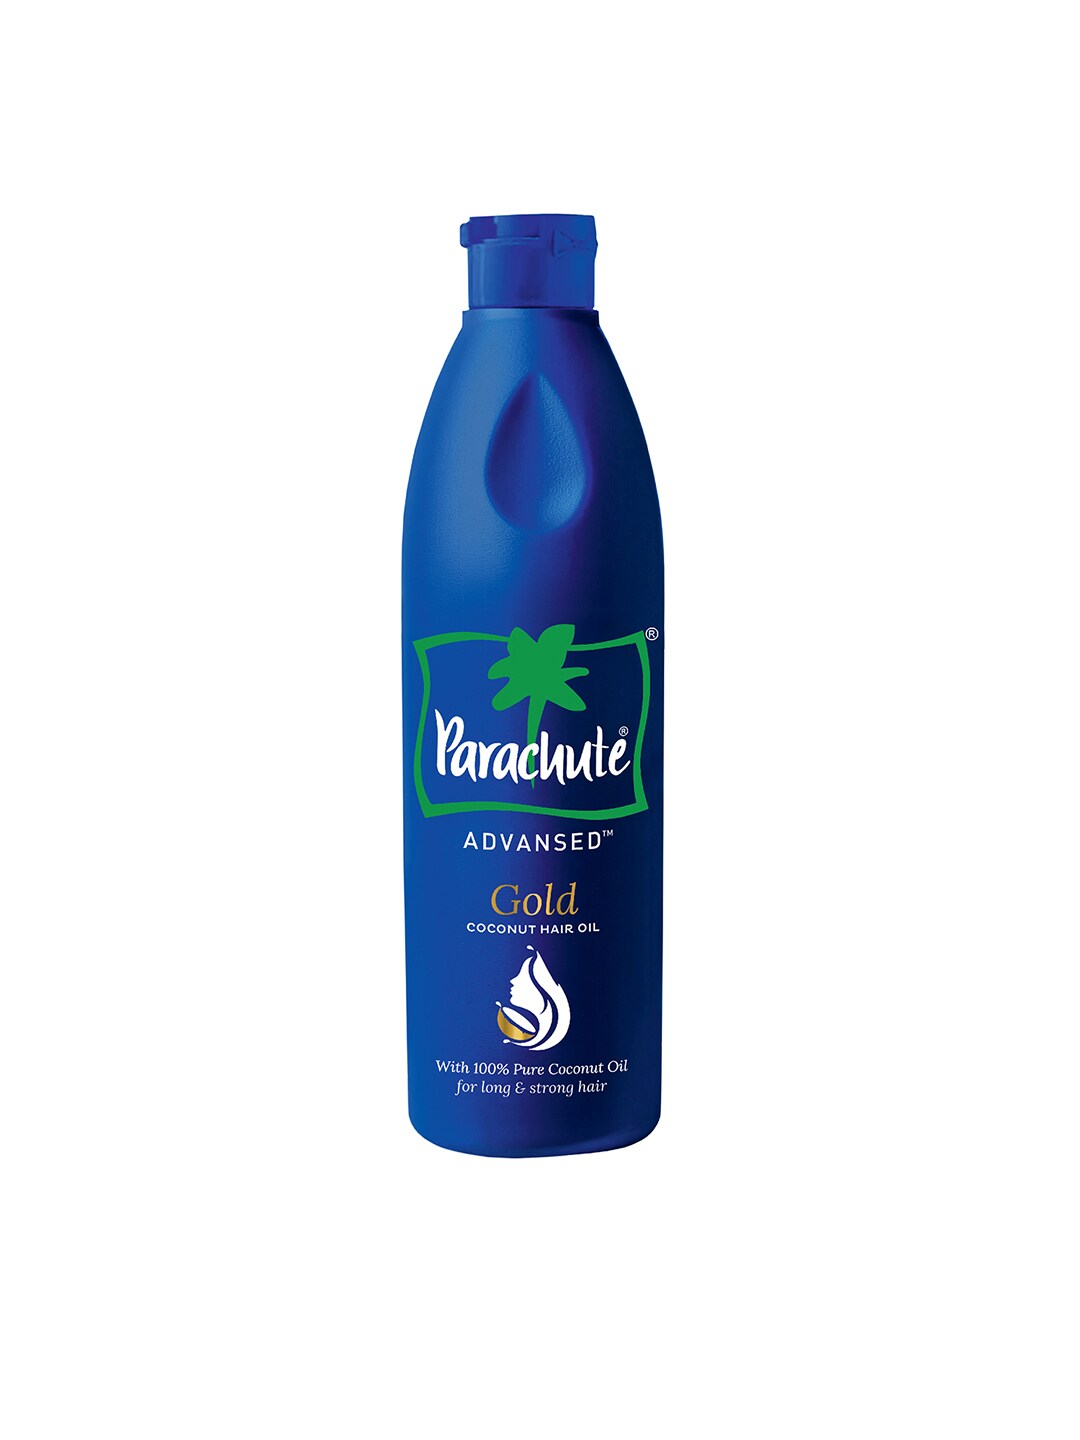 Parachute Advansed Gold Coconut Hair Oil for Long & Strong Hair - 400 ml Price in India